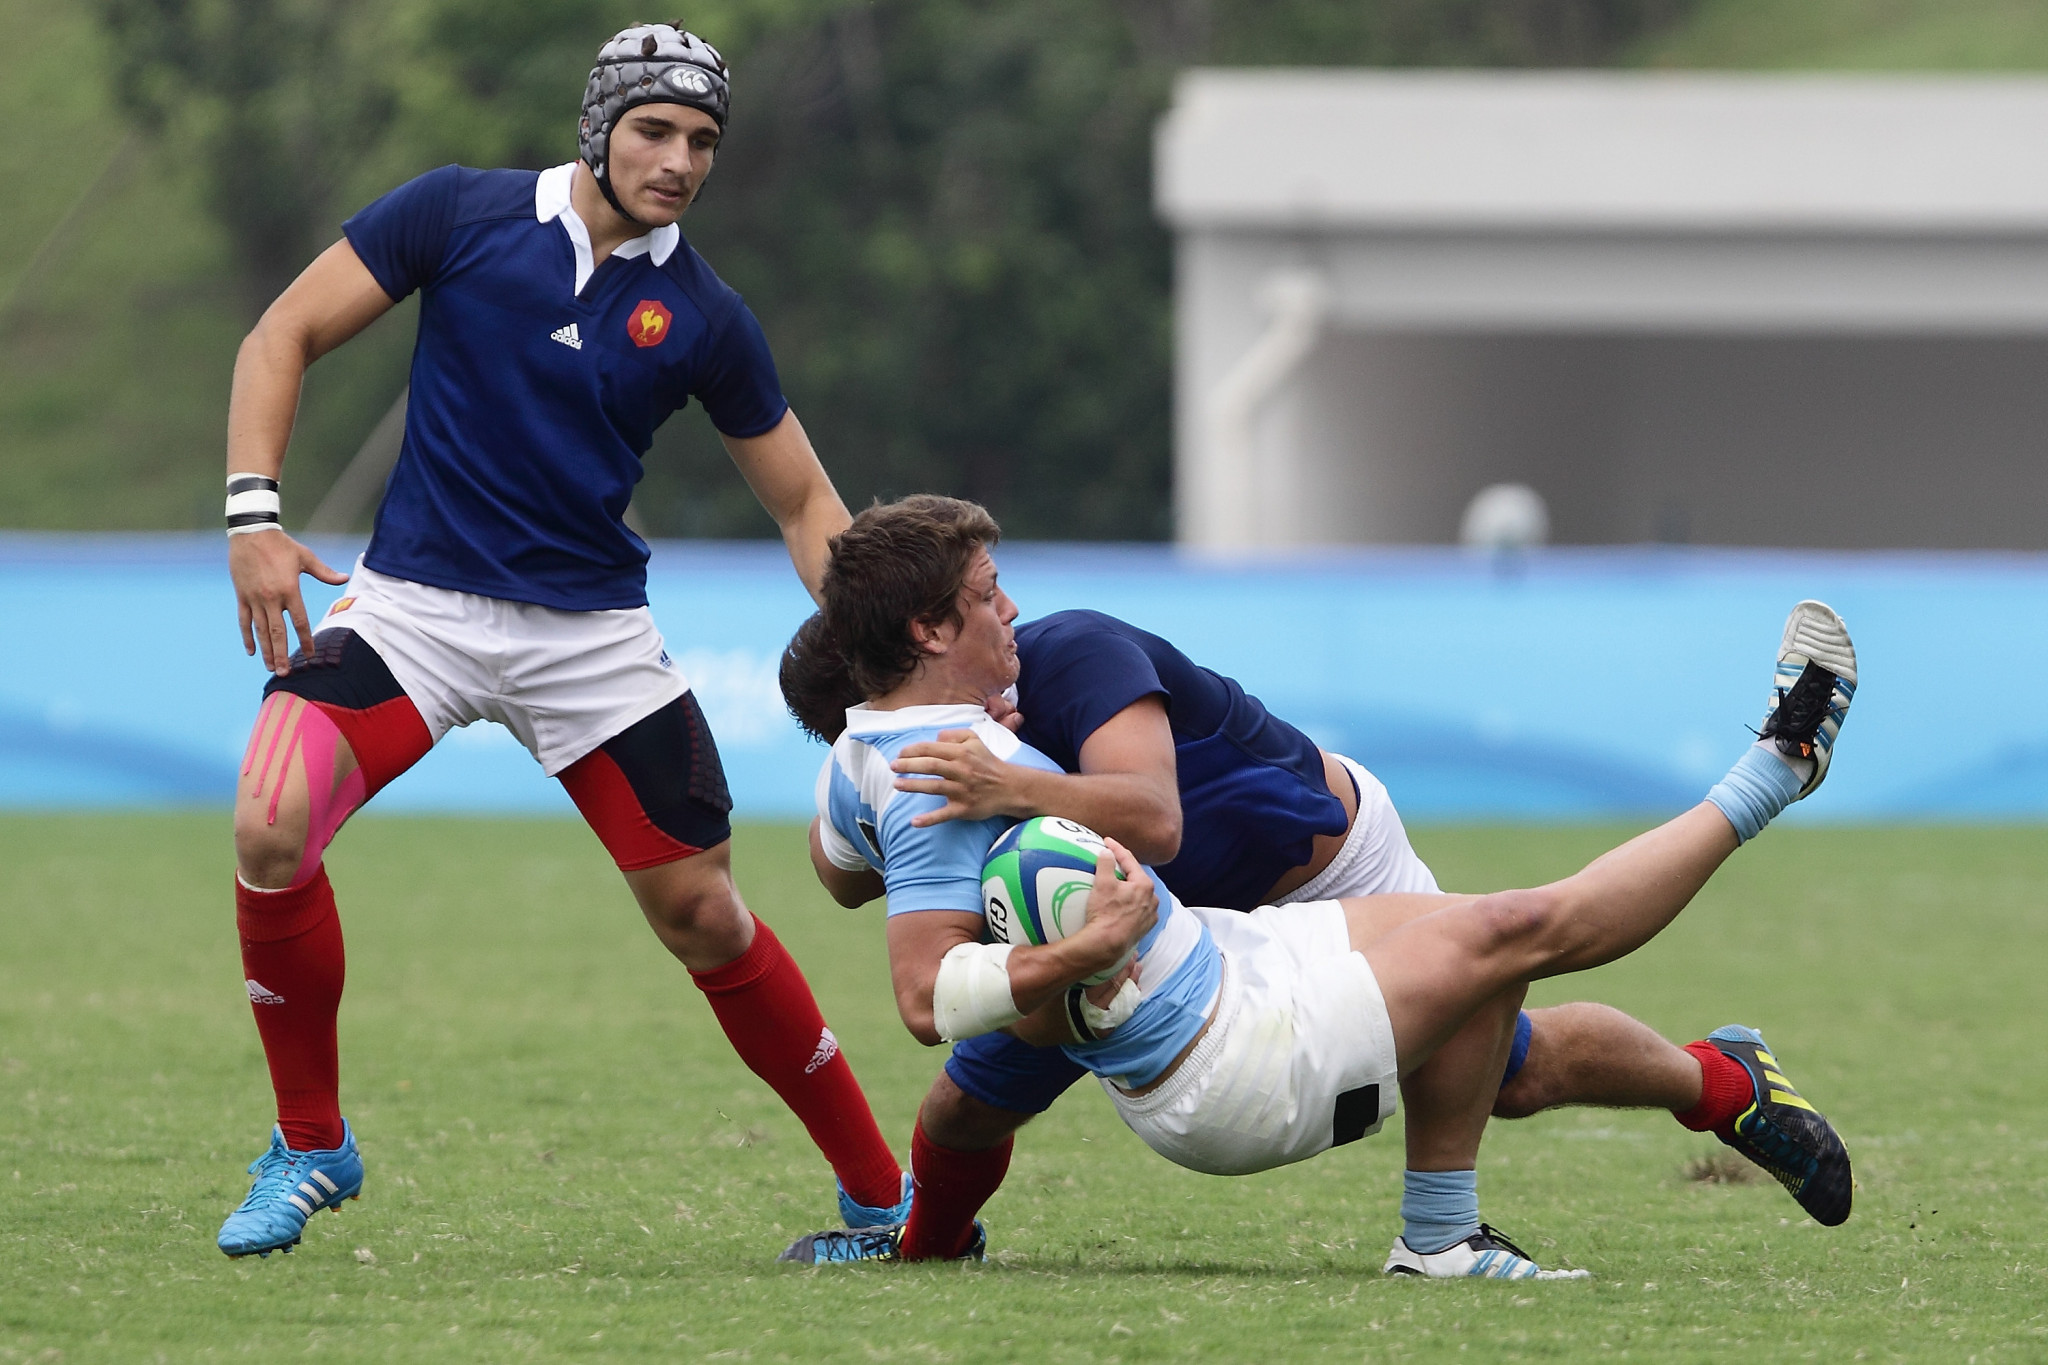 Rugby sevens made its Youth Olympic debut in Nanjing in 2014 ©Getty Images